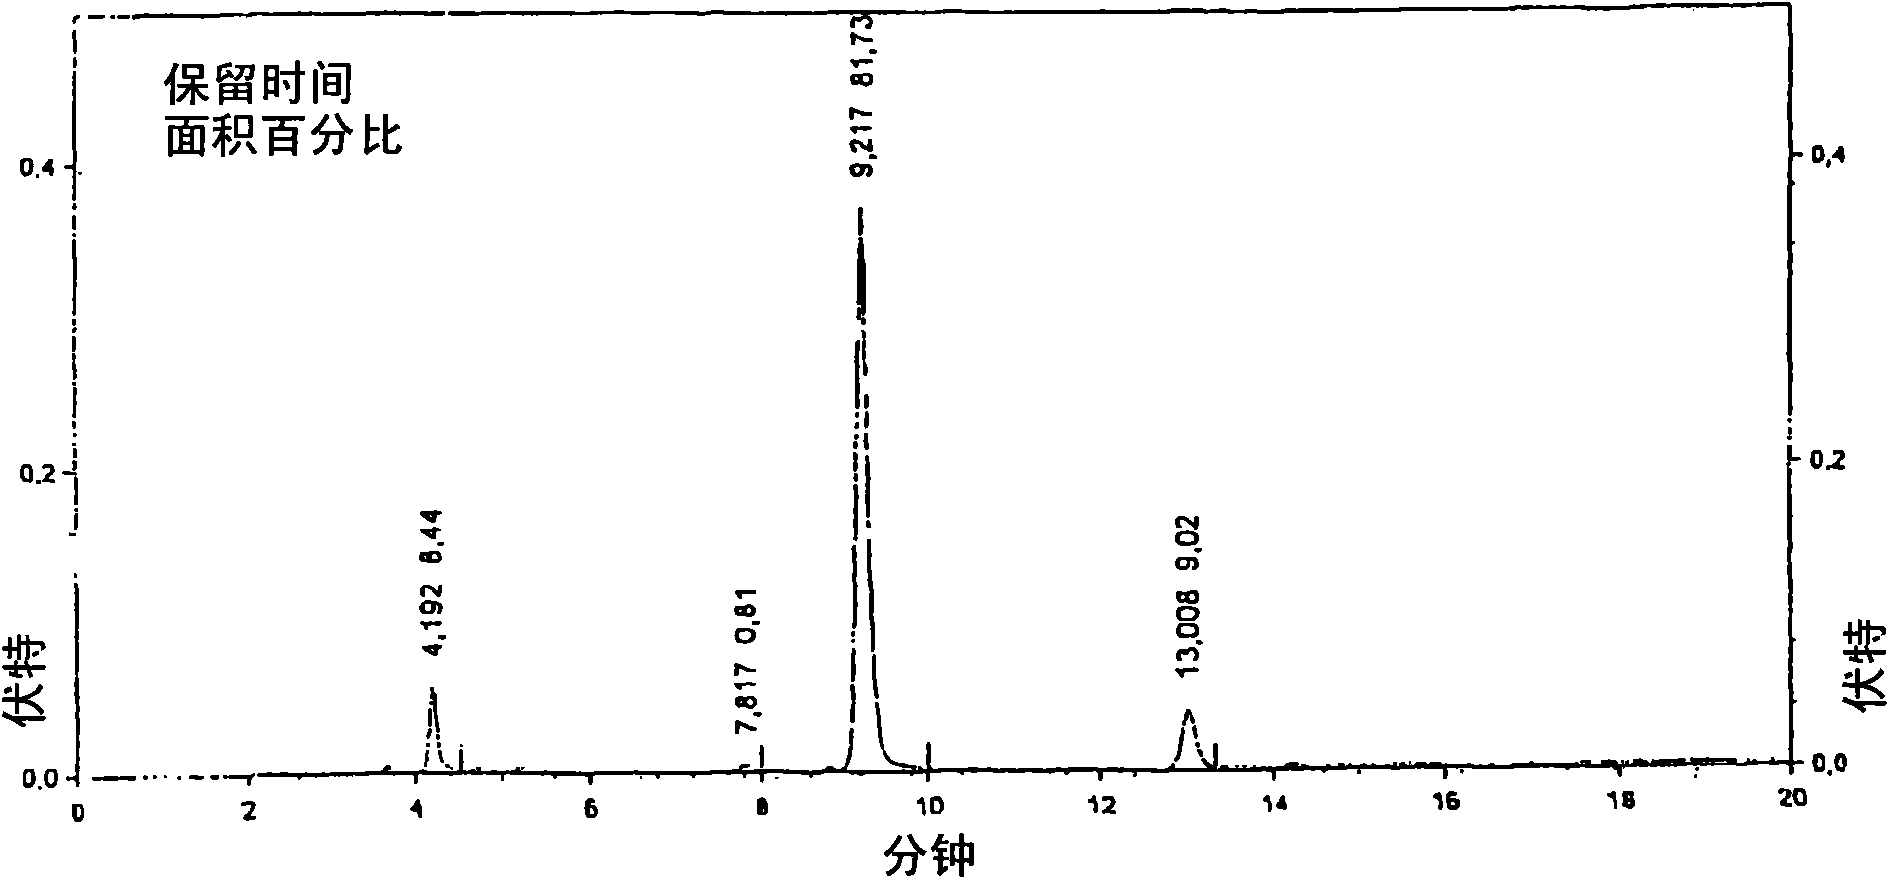 Process and apparatus for the production of hydroxytyrosol containing extract from olives and solids containing residues of olive oil extraction